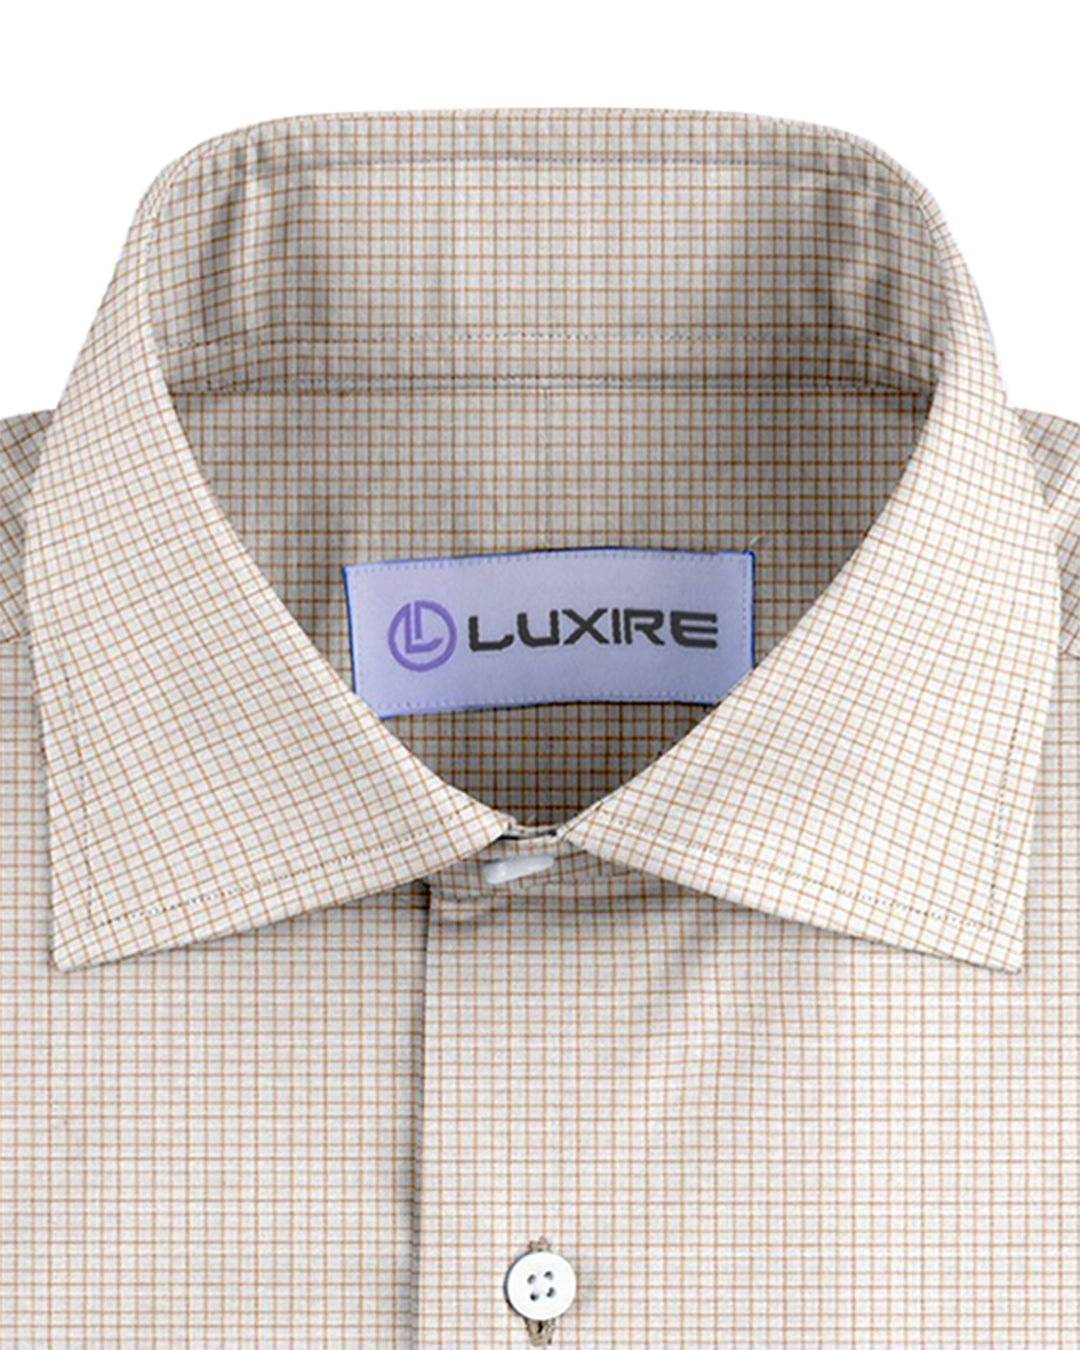 Collar of the custom linen shirt for men in tan and cream by Luxire Clothing